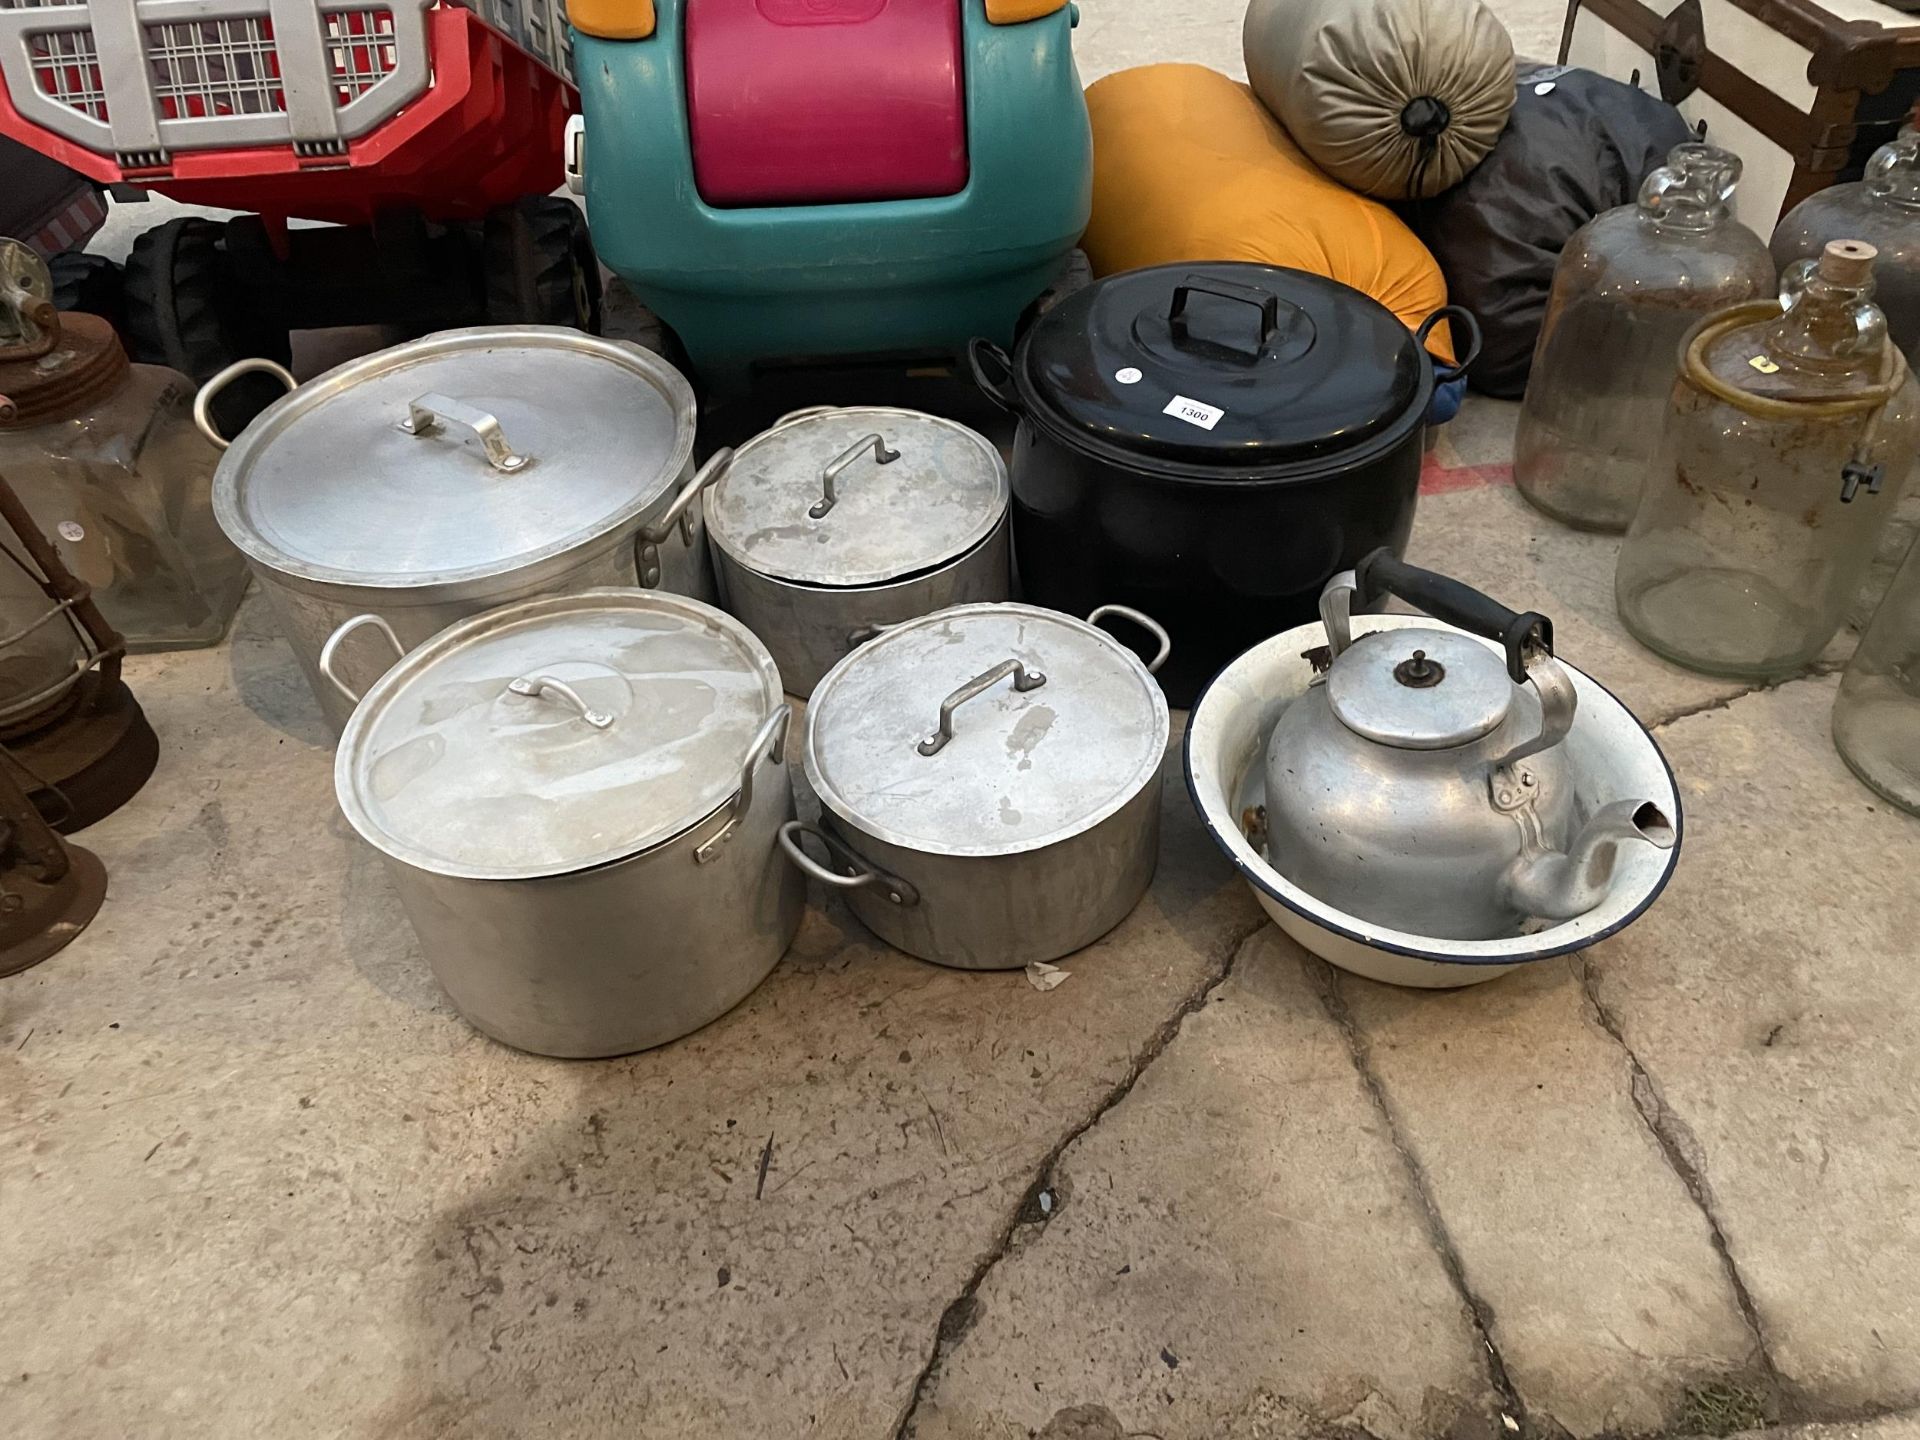 A GROUP OF FOUR LARGE STAINLESS STEEL COOKING POTS WITH LIDS, A LARGE BLACK ENAMEL COOKING POT